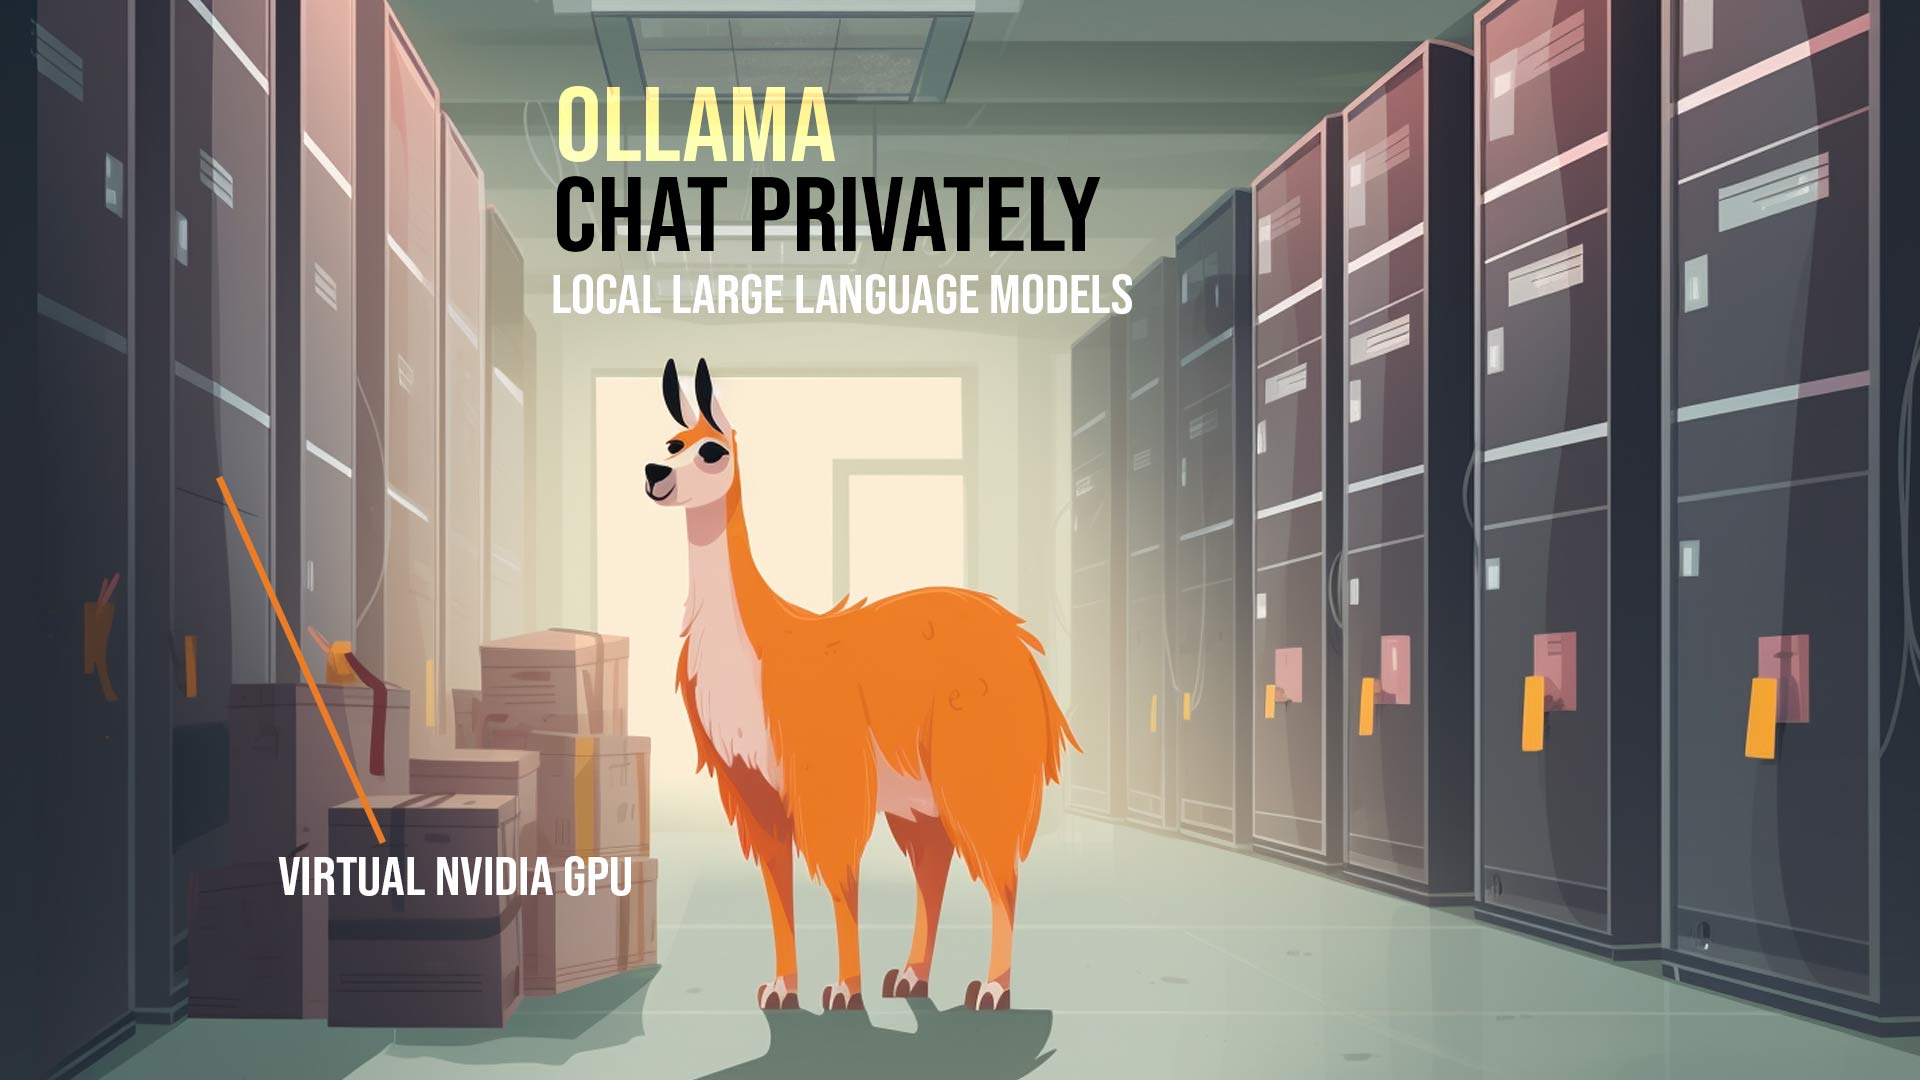 Chat privately using Ollama on your own infrastructure. Llama2 and Mistral on an NVIDIA A40 48GB GPU